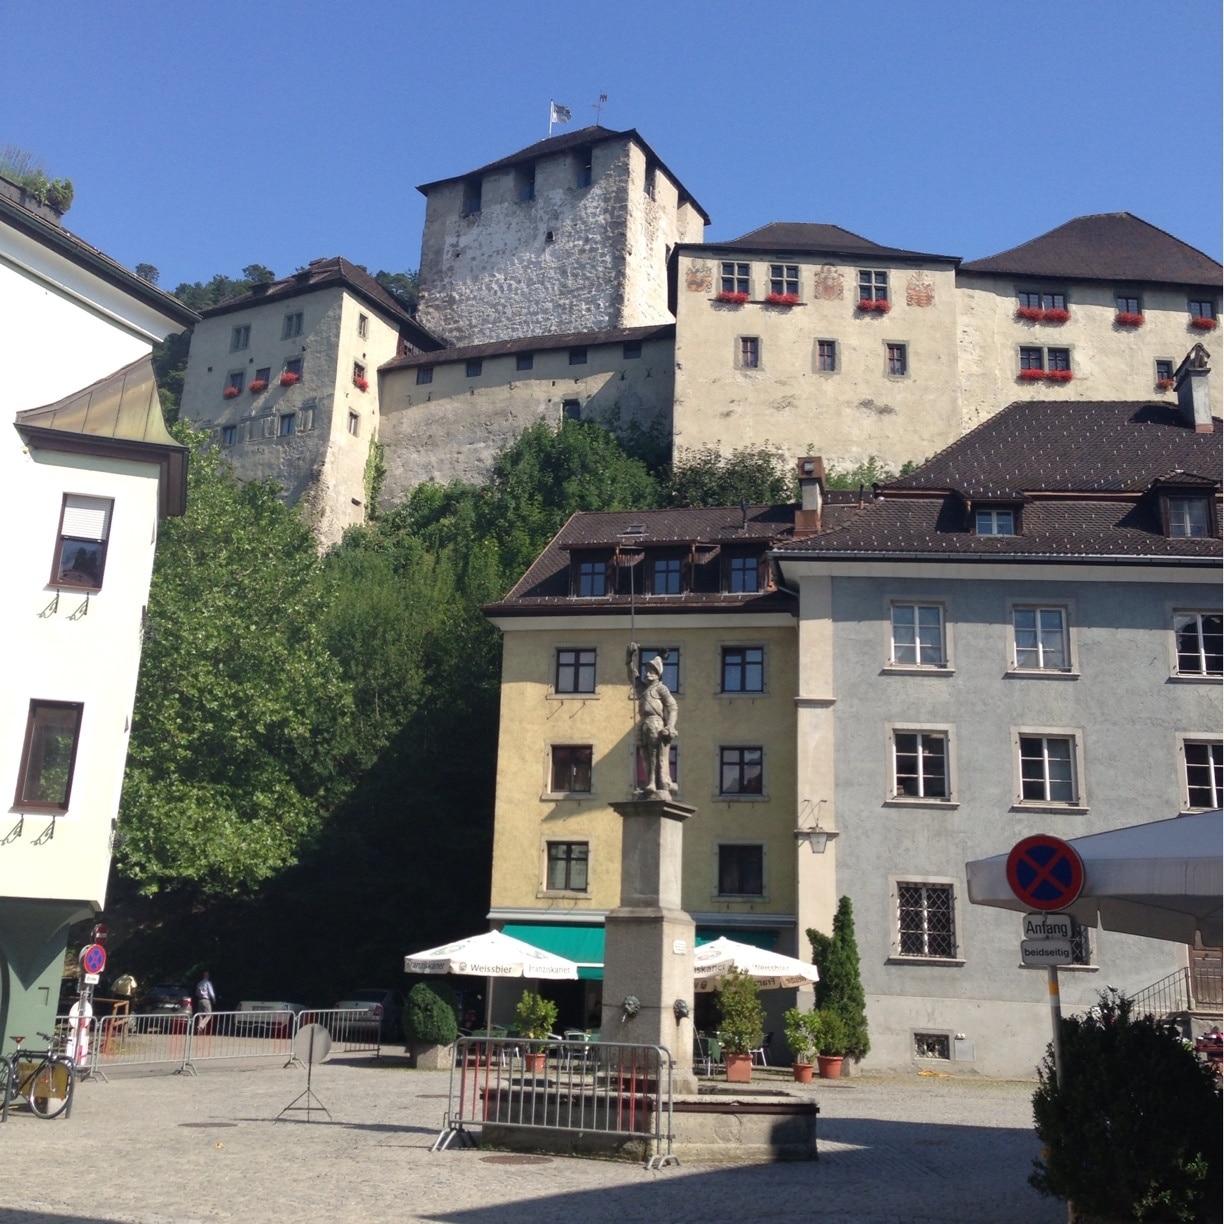 The Schattenburg castle has three things to offer: an interesting museum, a fine restaurant - they have the largest schnitzel in the land - and a grand view over middleeavel Feldkirch. Take the 'Beggarsstairs' - it once was home to the city's poor as well - to the left from this view, across/under path the road. Worth the climb! http://www.schattenburg.at/